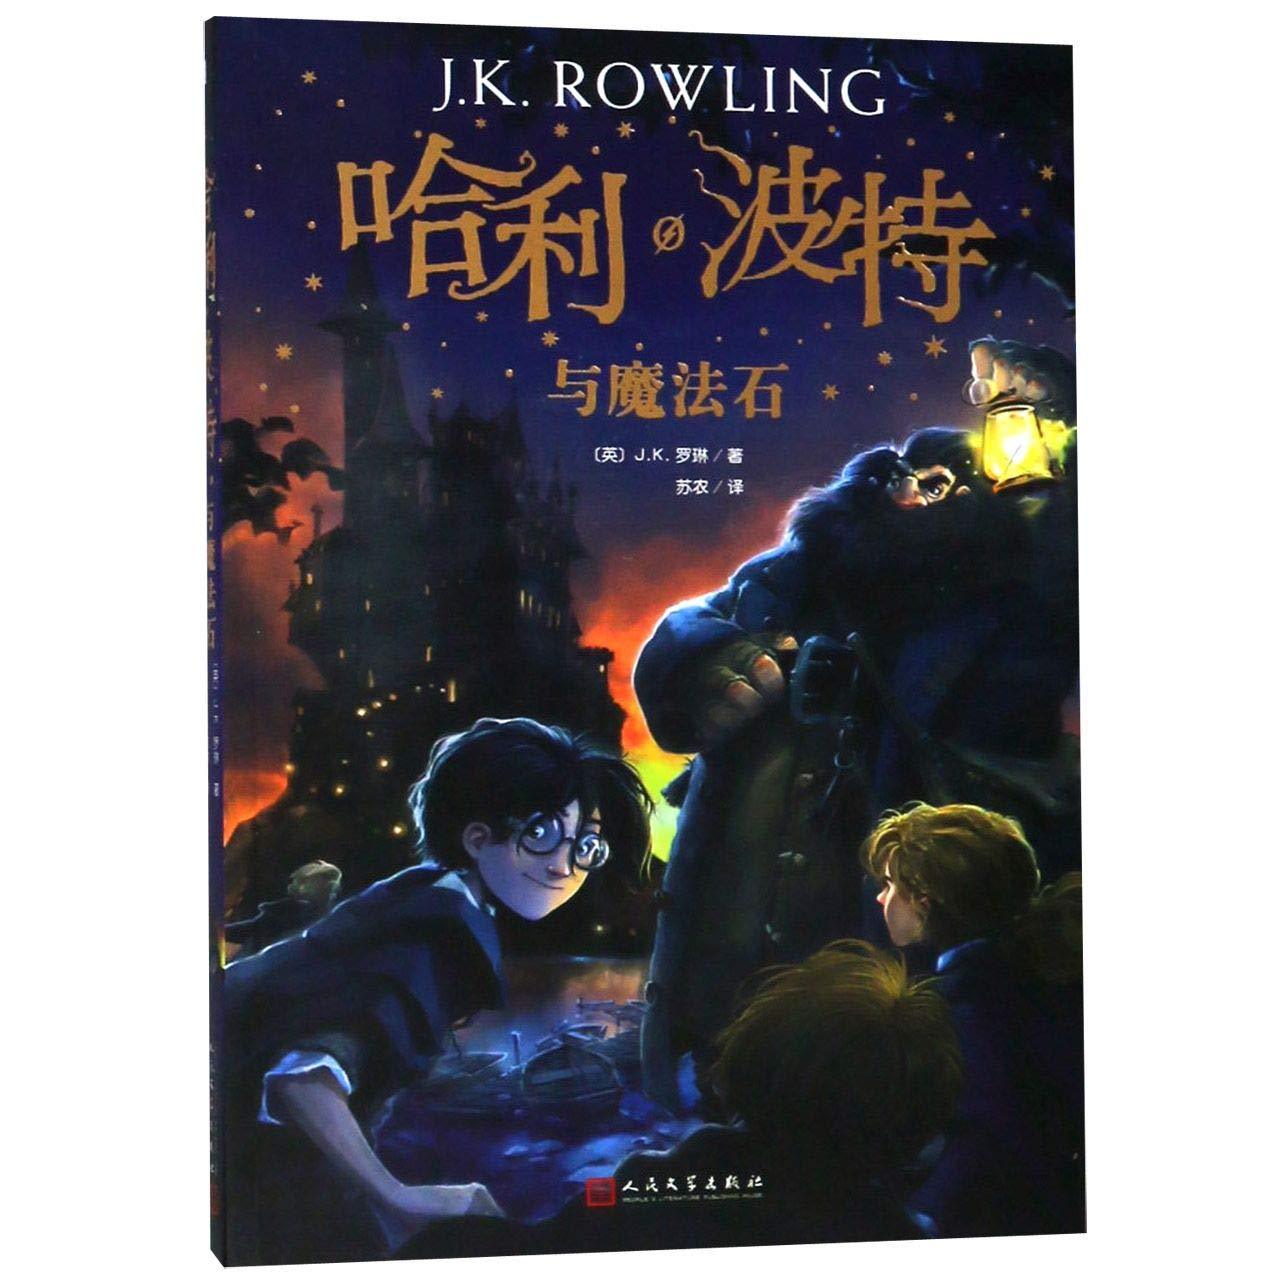 Book HARRY POTTER & THE PHILOSOPHERS STONE J. K. Rowling (J. K. LUO LIN)